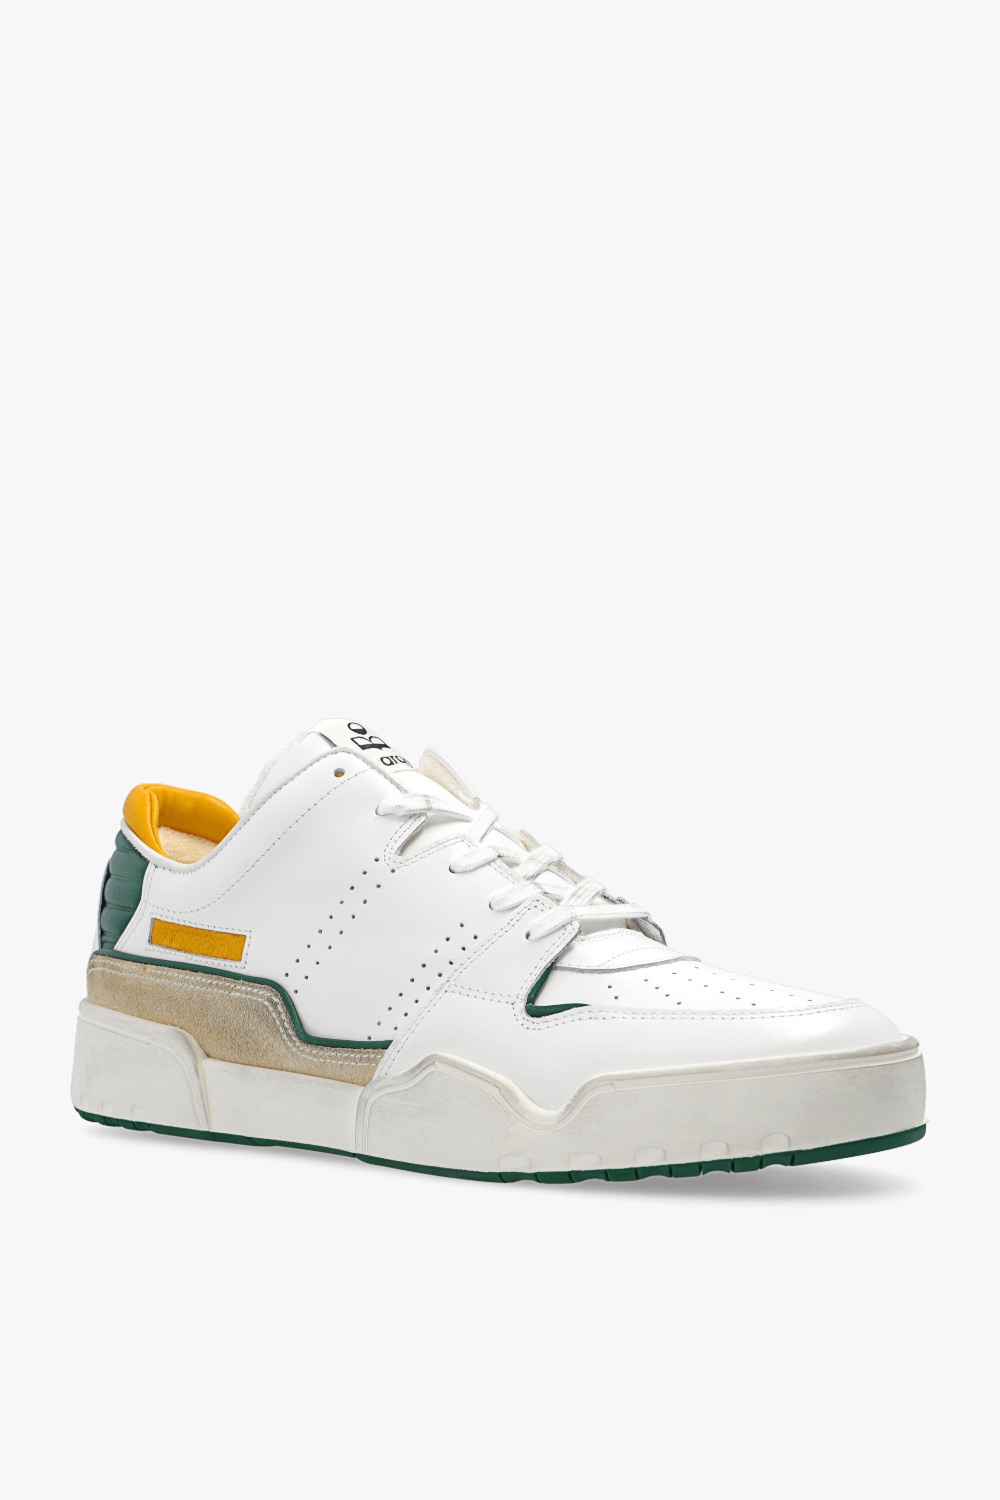 Isabel Marant ‘Emereeh’ sneakers